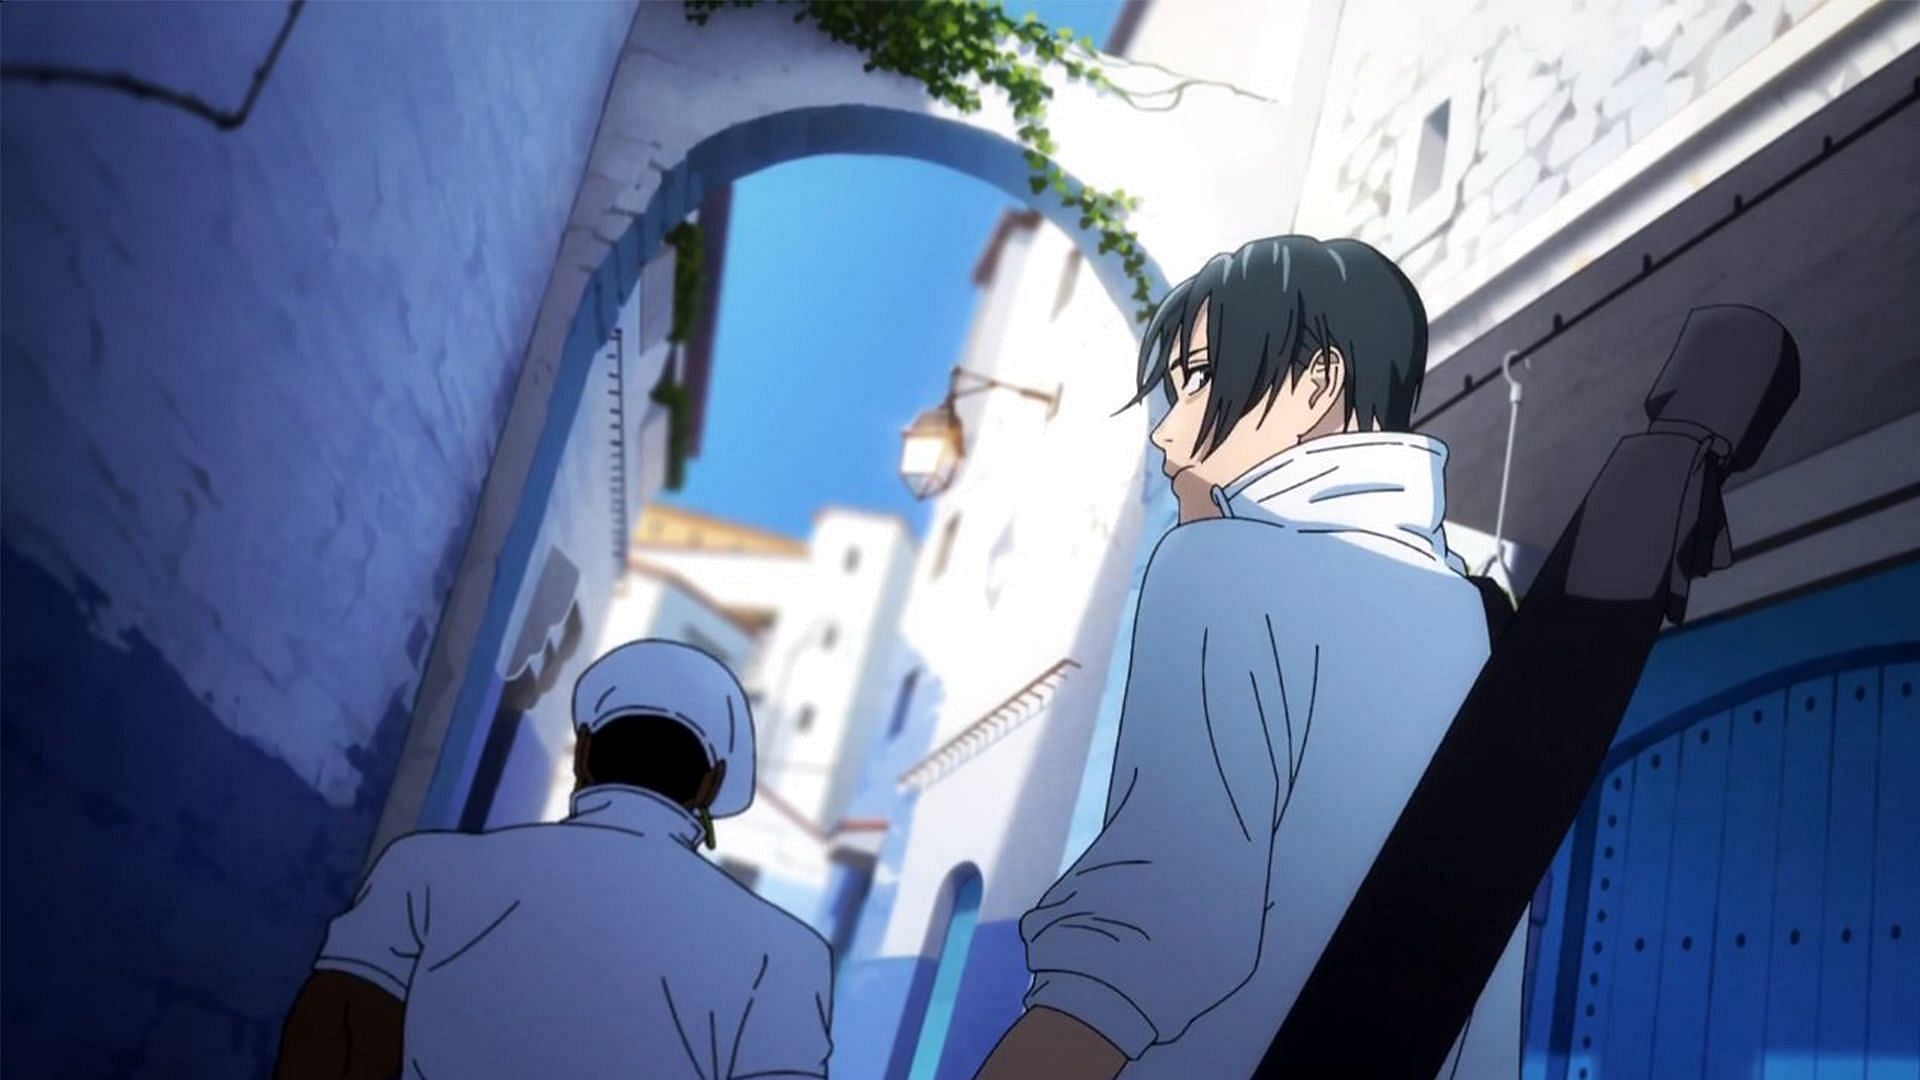 Yuta and Gabriel as seen in the series